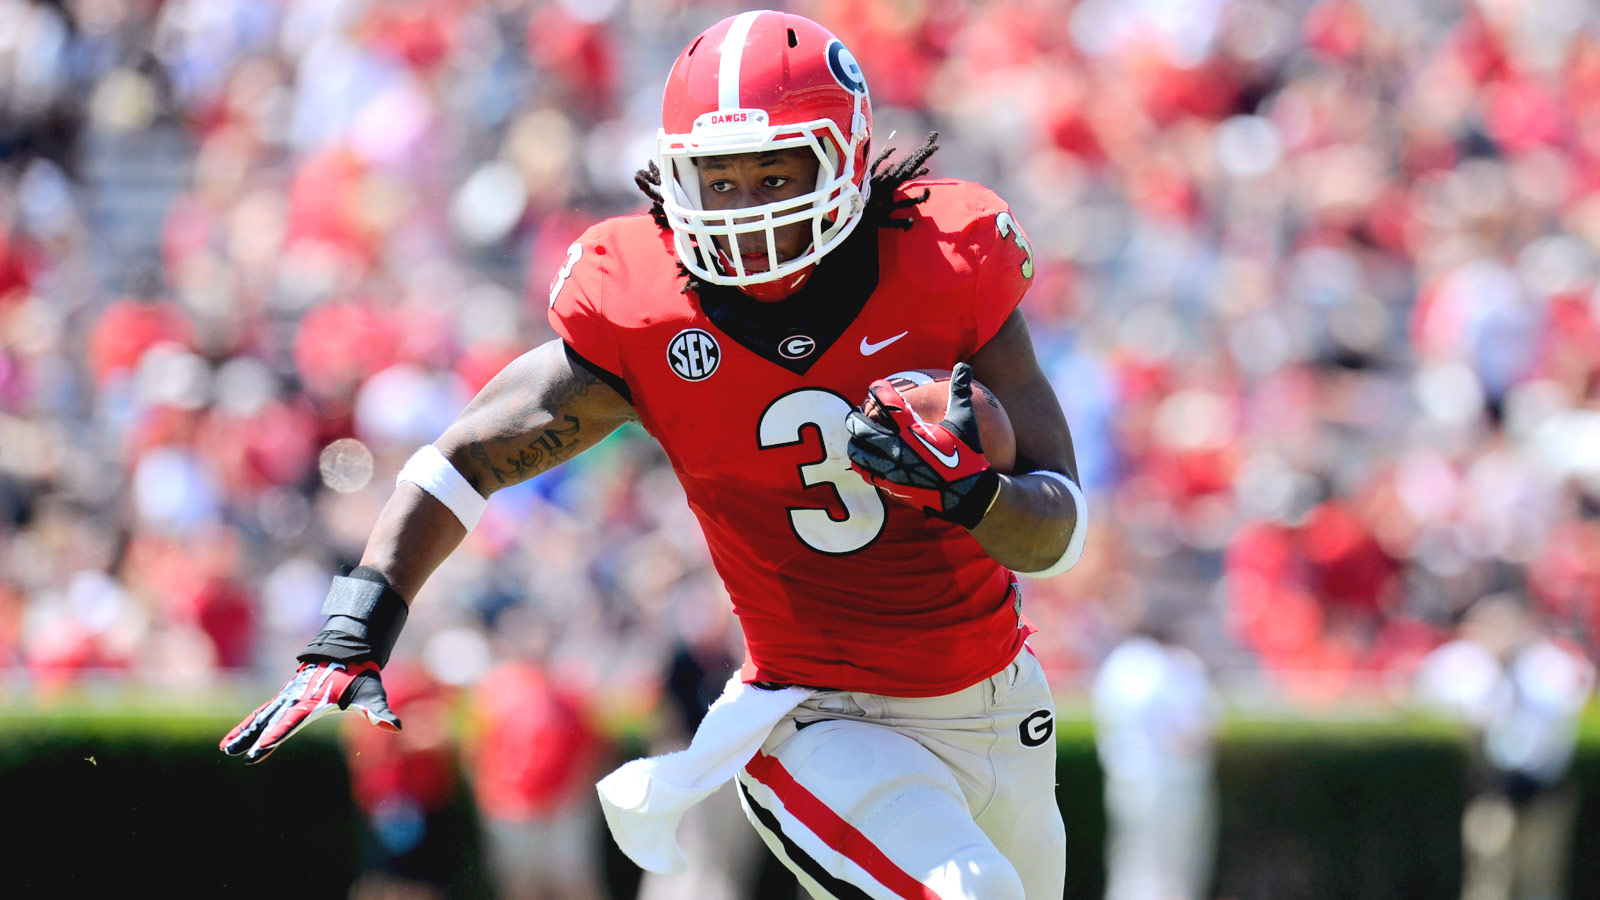 Outkick's 2014 Sec East Predictions - Running Backs With Number 3 , HD Wallpaper & Backgrounds